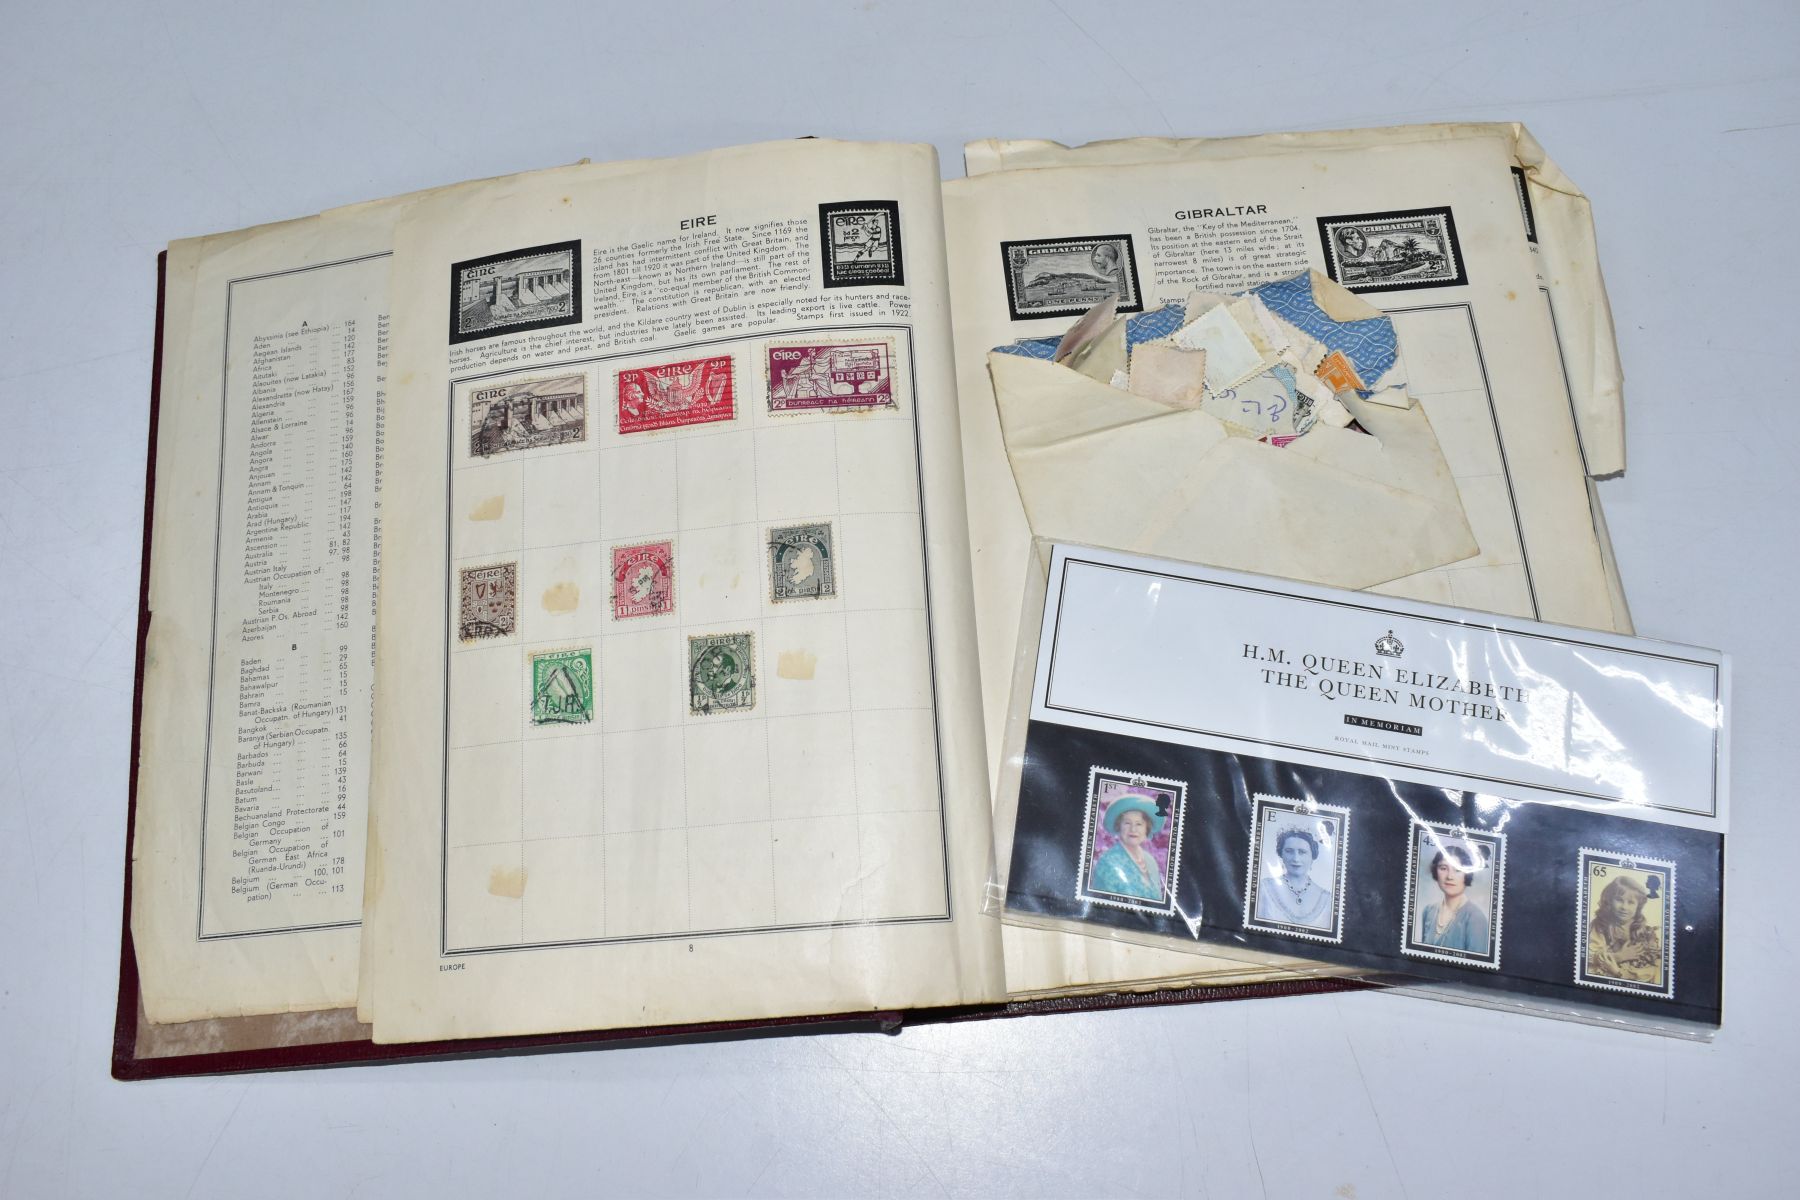 WORLDWIDE STAMP COLLECTION in Meteor loose leaf album, mainly mid period to about 1950